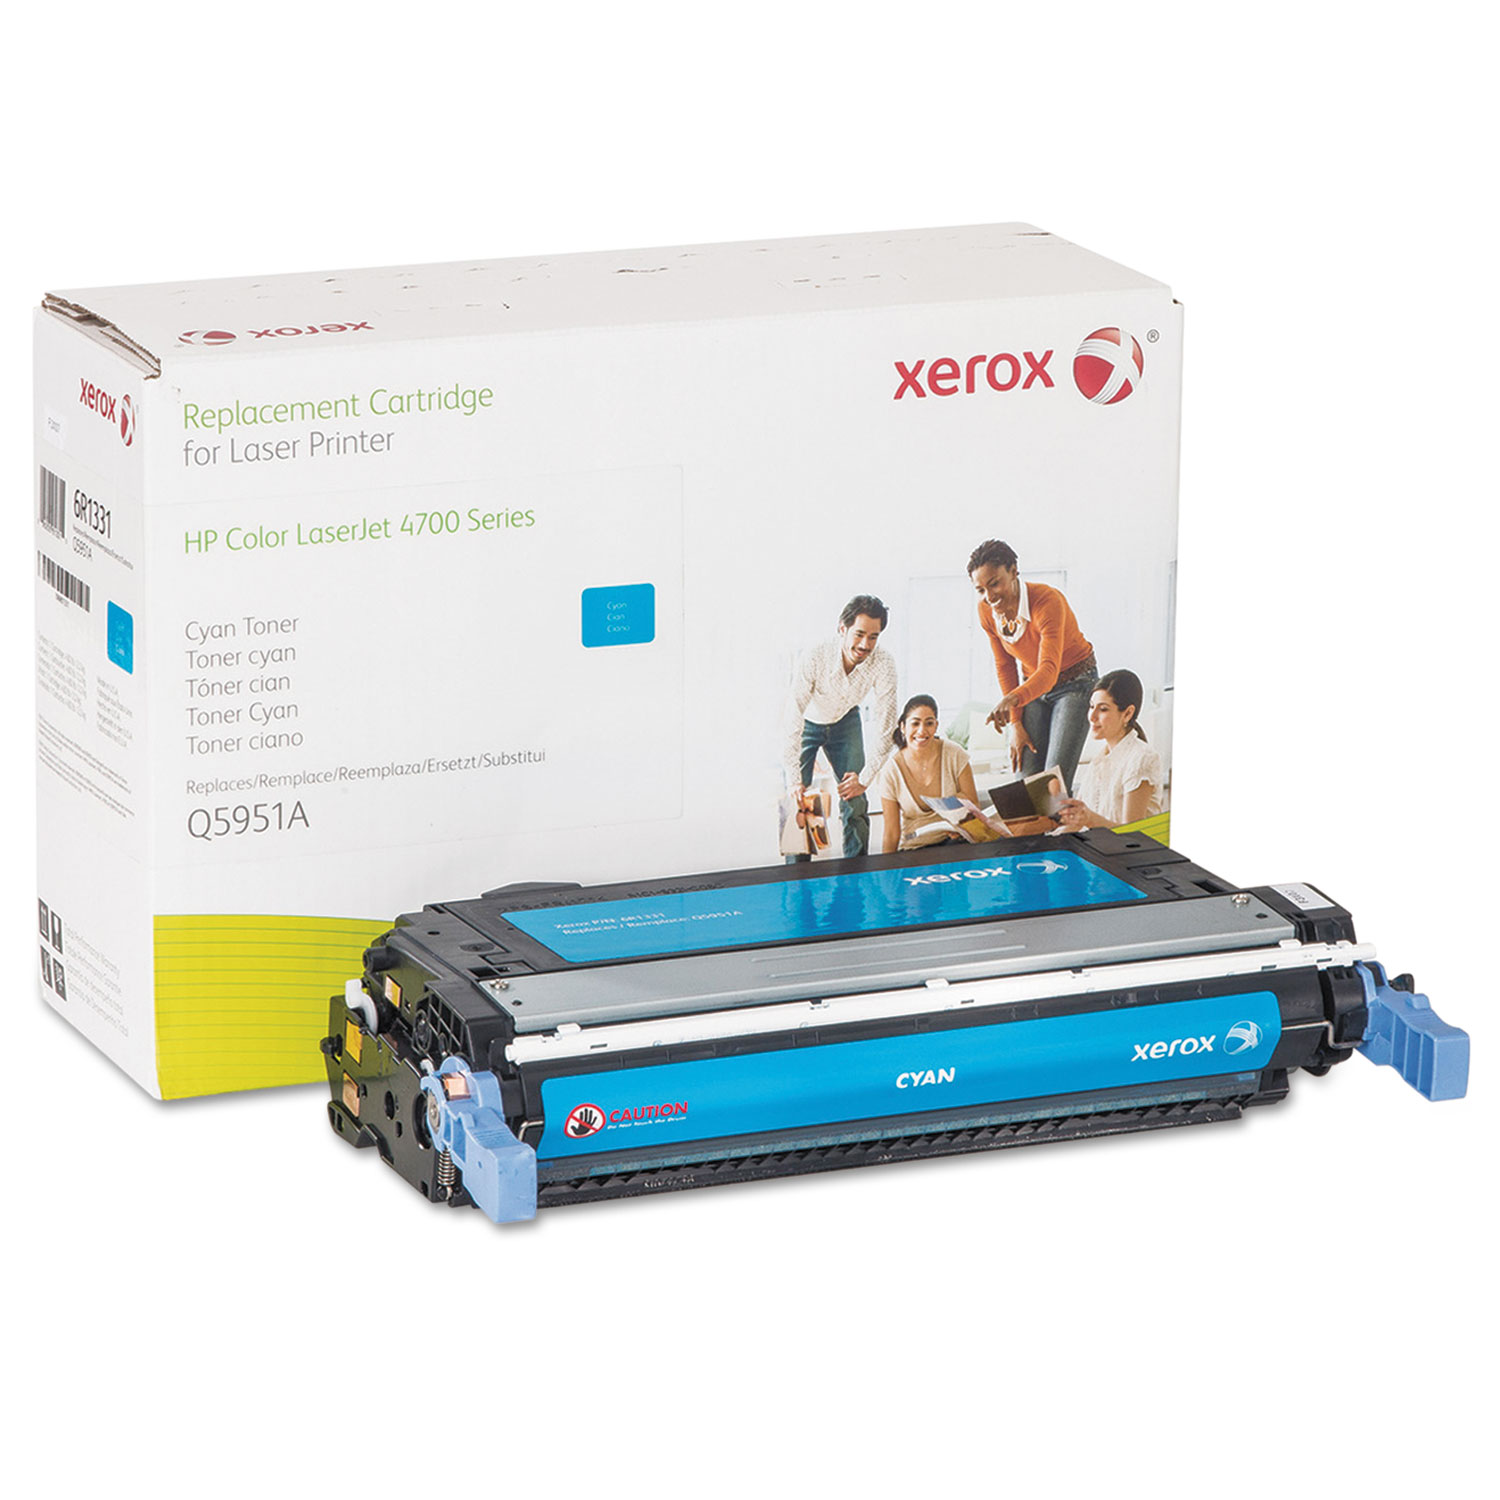  Xerox 006R01331 006R01331 Replacement Toner for Q5951A (643A), Cyan (XER006R01331) 